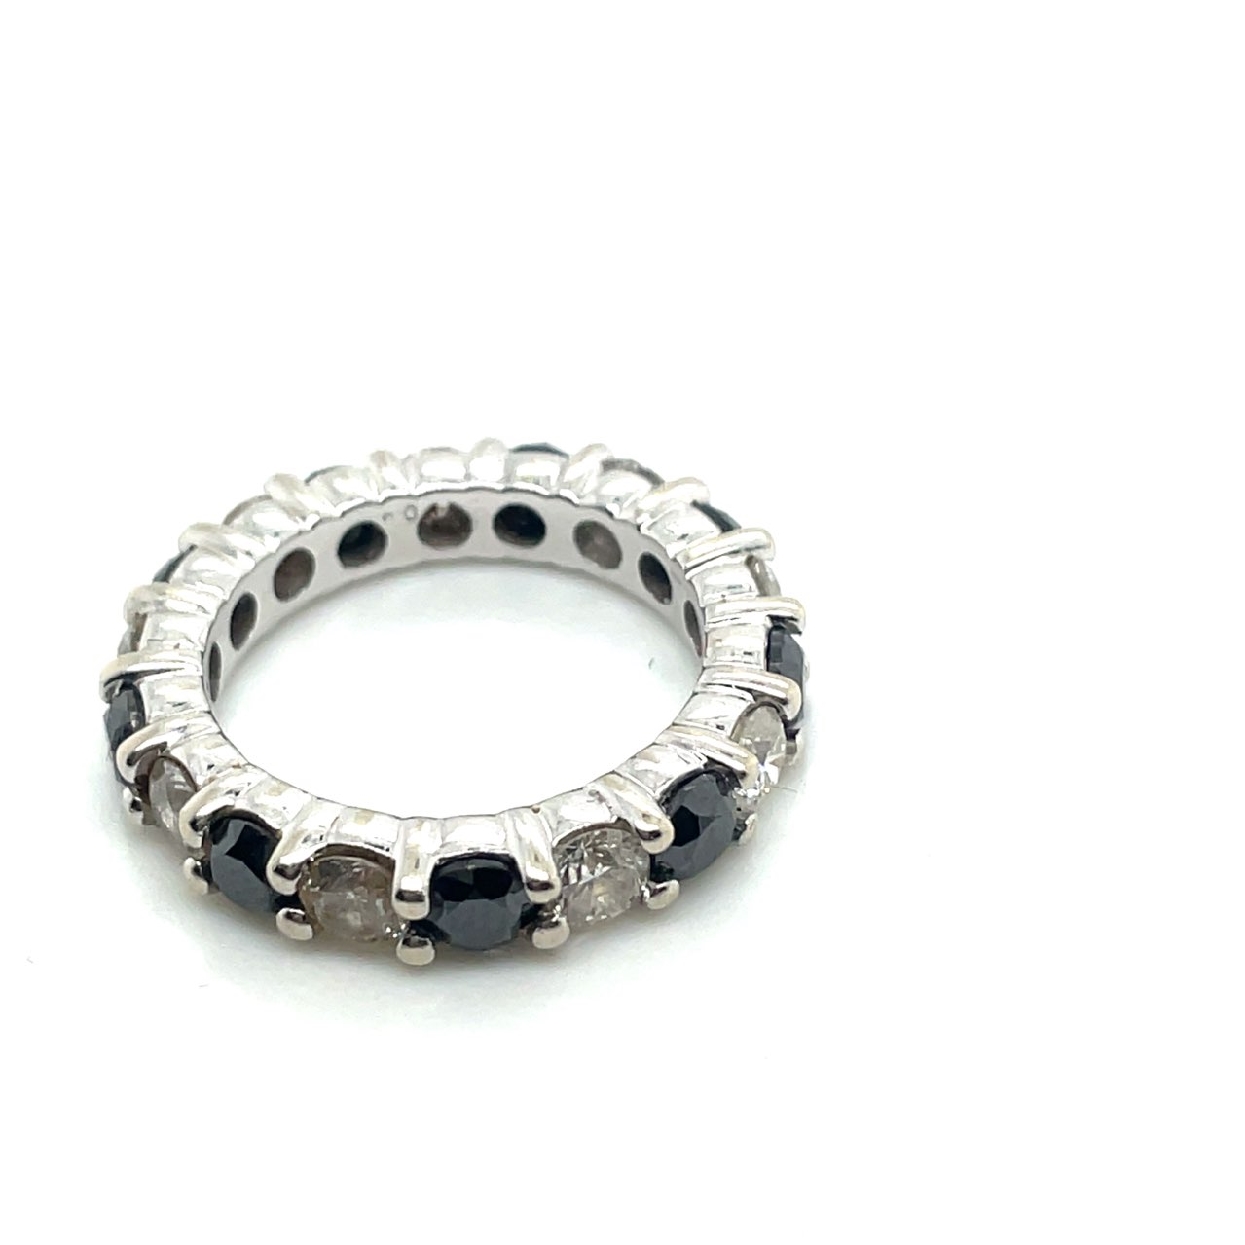 14K White Gold Eternity Band with Black and White Diamonds 4.5TDW Size 6.5 
4mm shank 